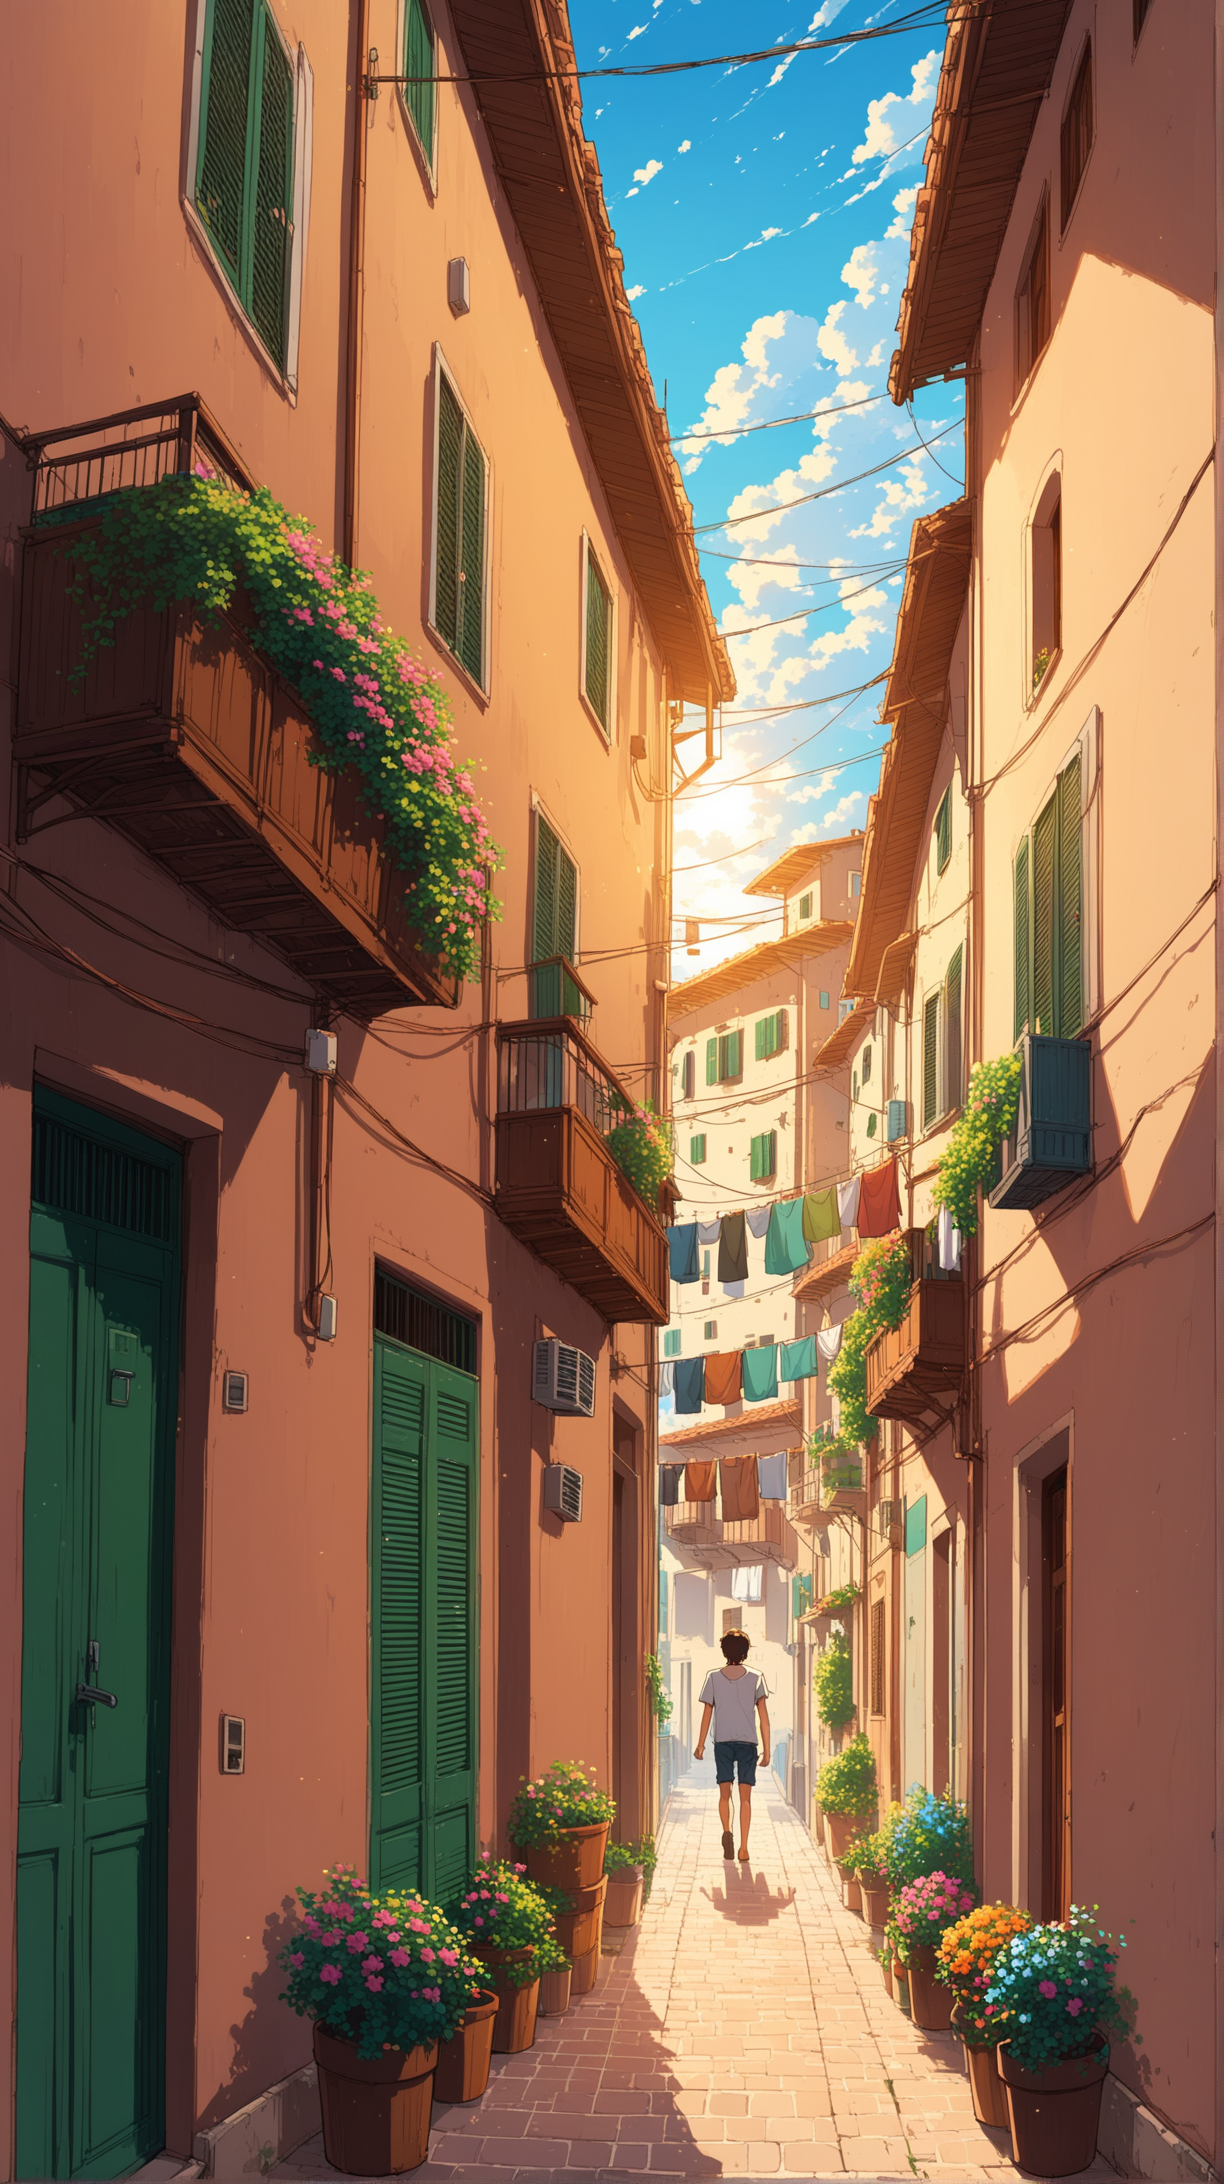 boy and girls walking in alley between The balconies with many of hanging clothes laundry on each balcony at the apartment building in neghbourhood in a small village in Italy, people walking in alley, shops in alley, flowers potted, beautiful evening summer sky, anime, ghibli studio style, trending pixiv fansbox, acrylic palette colors, ultra highly detailed form and line, wire and pole, codex_401 art style, amazing ilustration anime

